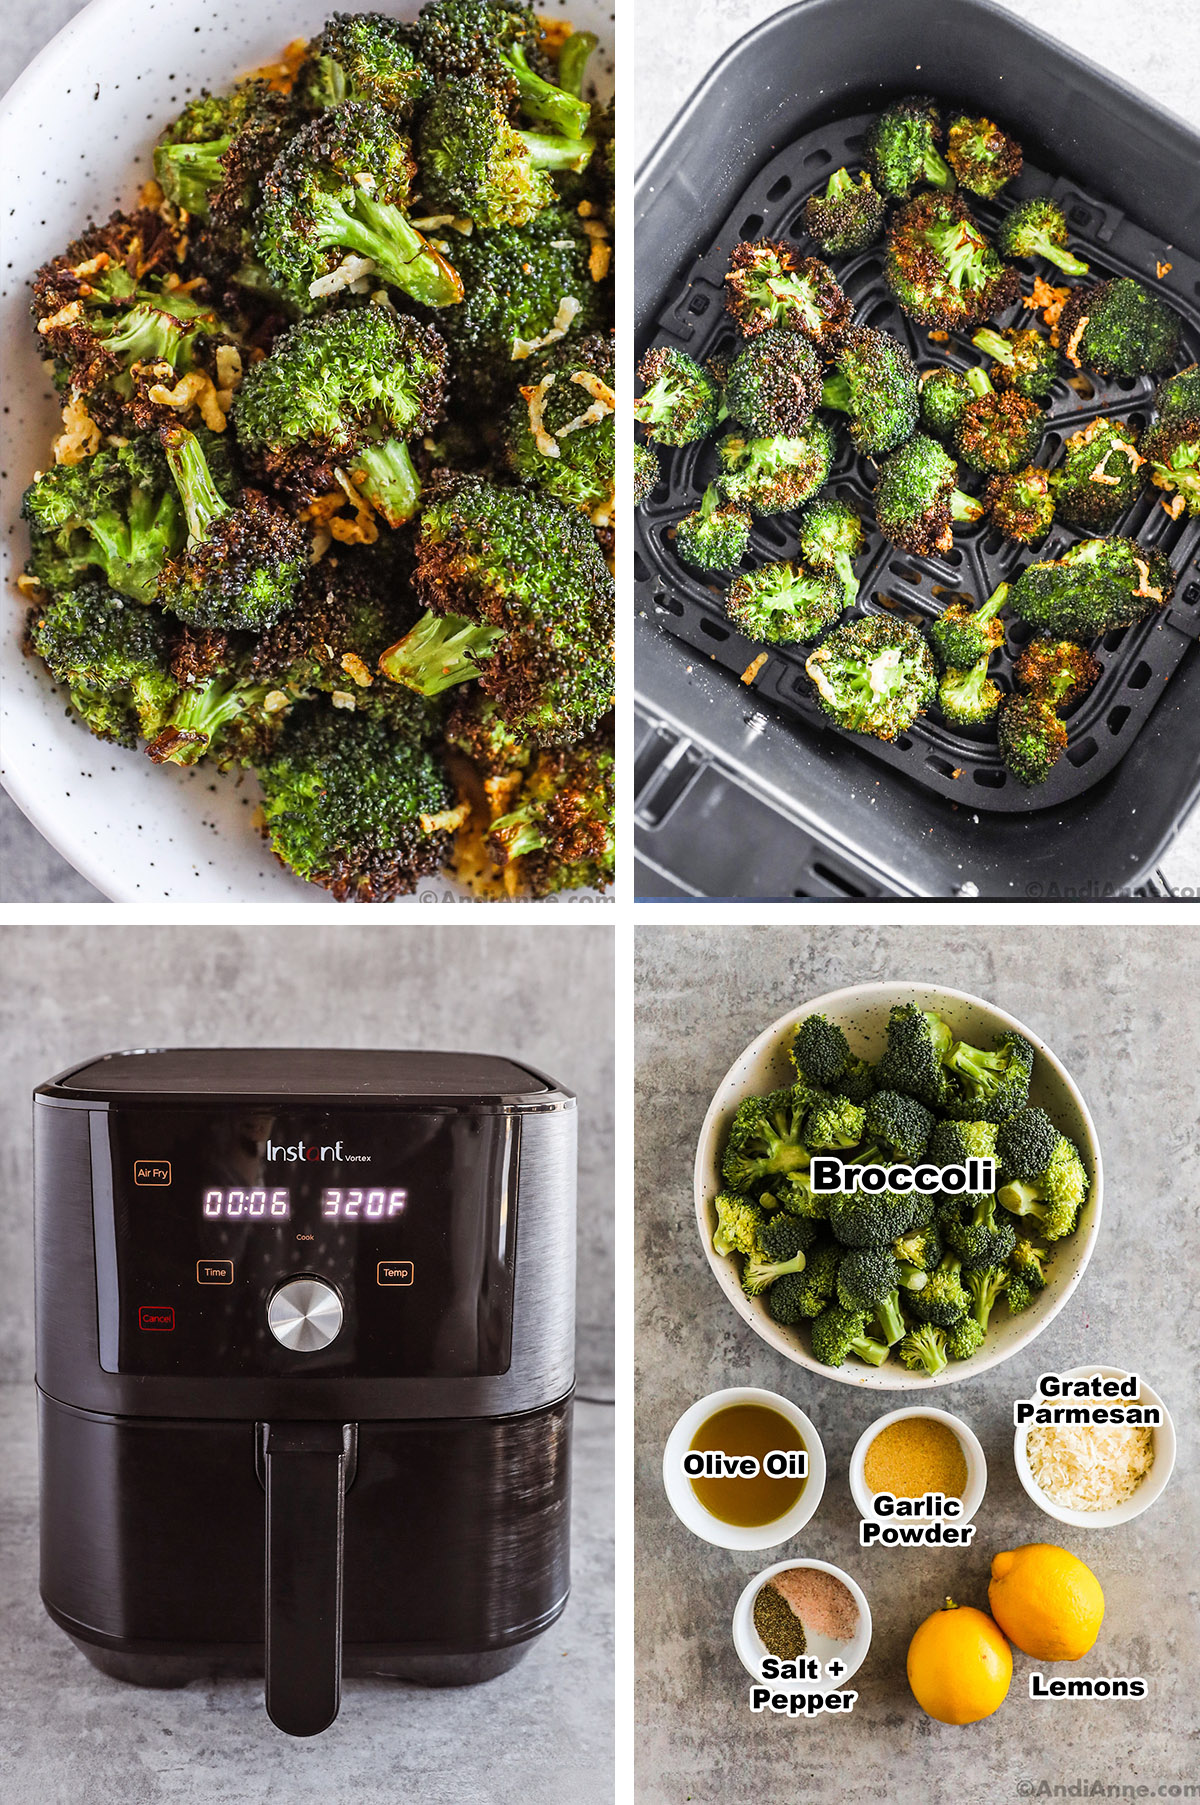 Four images, first is bowl of crispy broccoli, second is air fryer basket with broccoli, third is an air fryer, fourth is recipe ingredients in bowls.